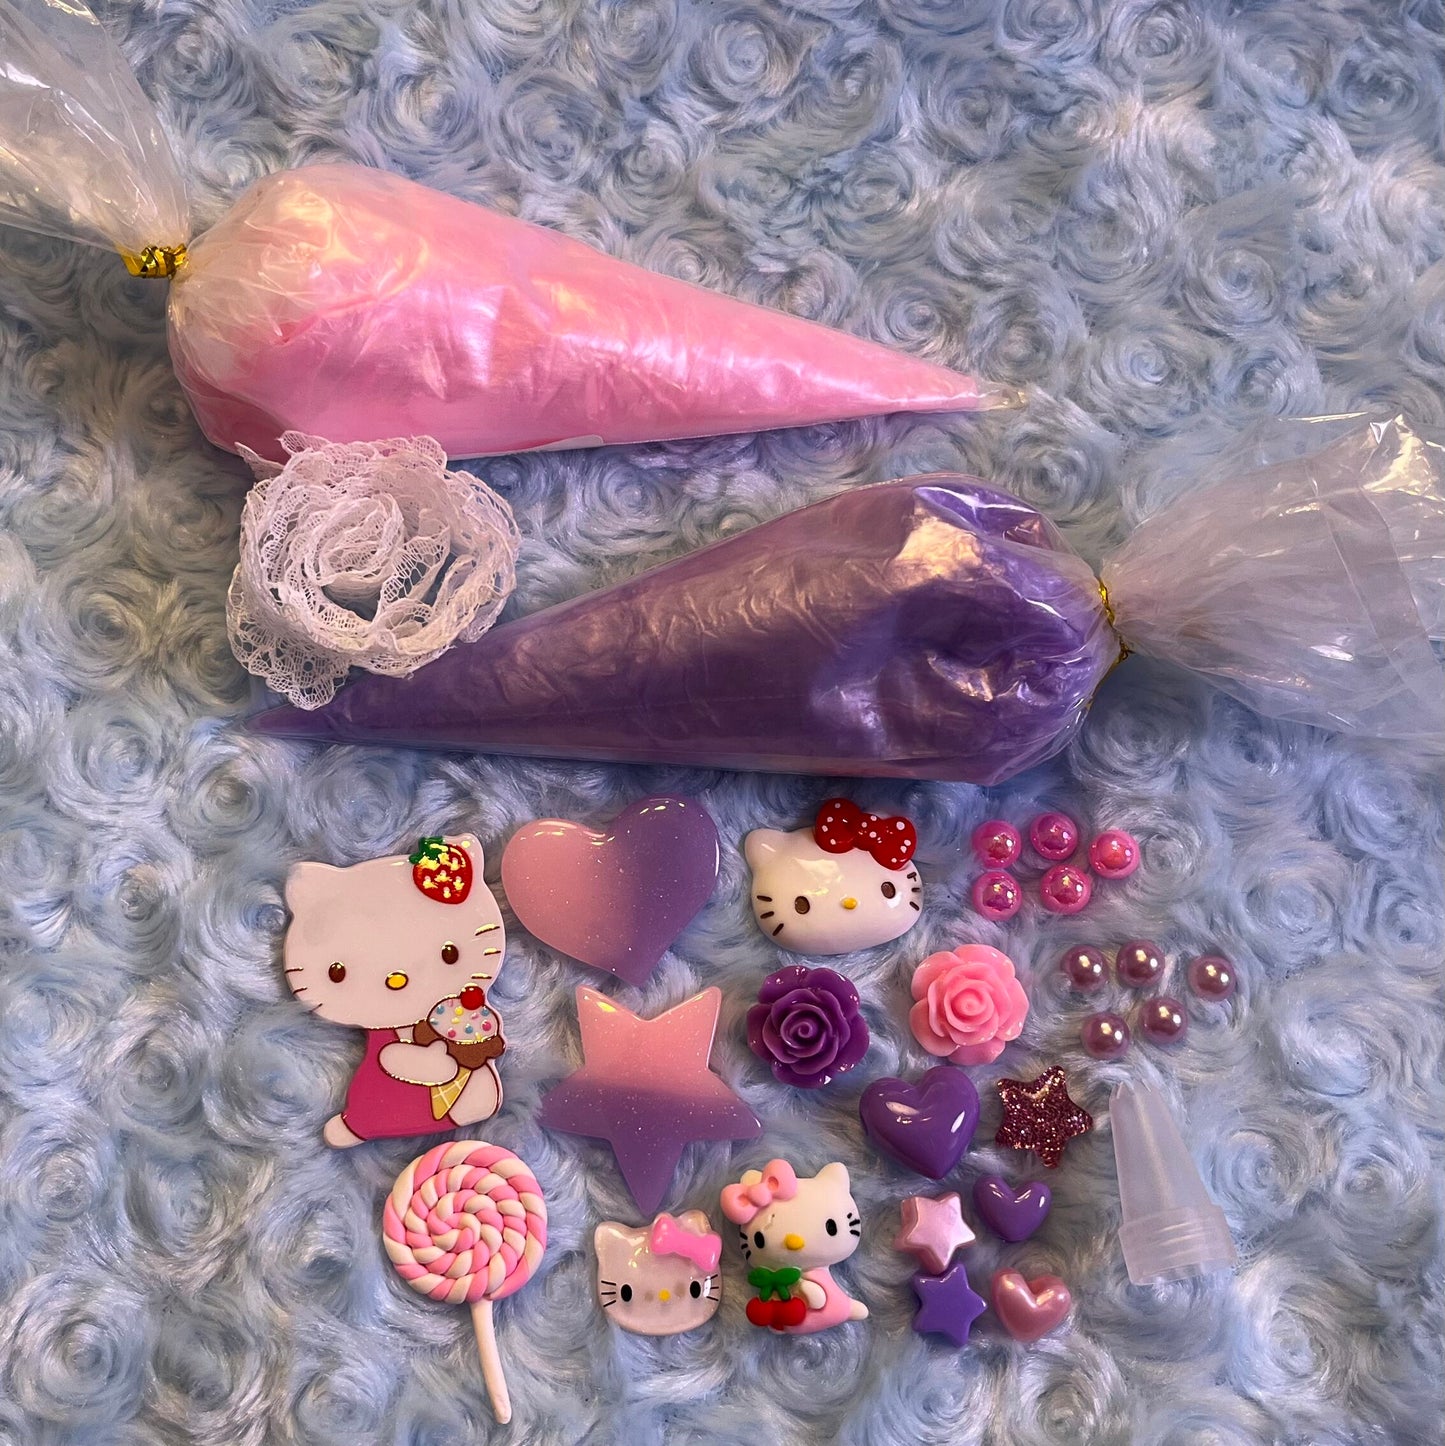 DIY Decoden Kits/Supplies (Do It Yourself!)